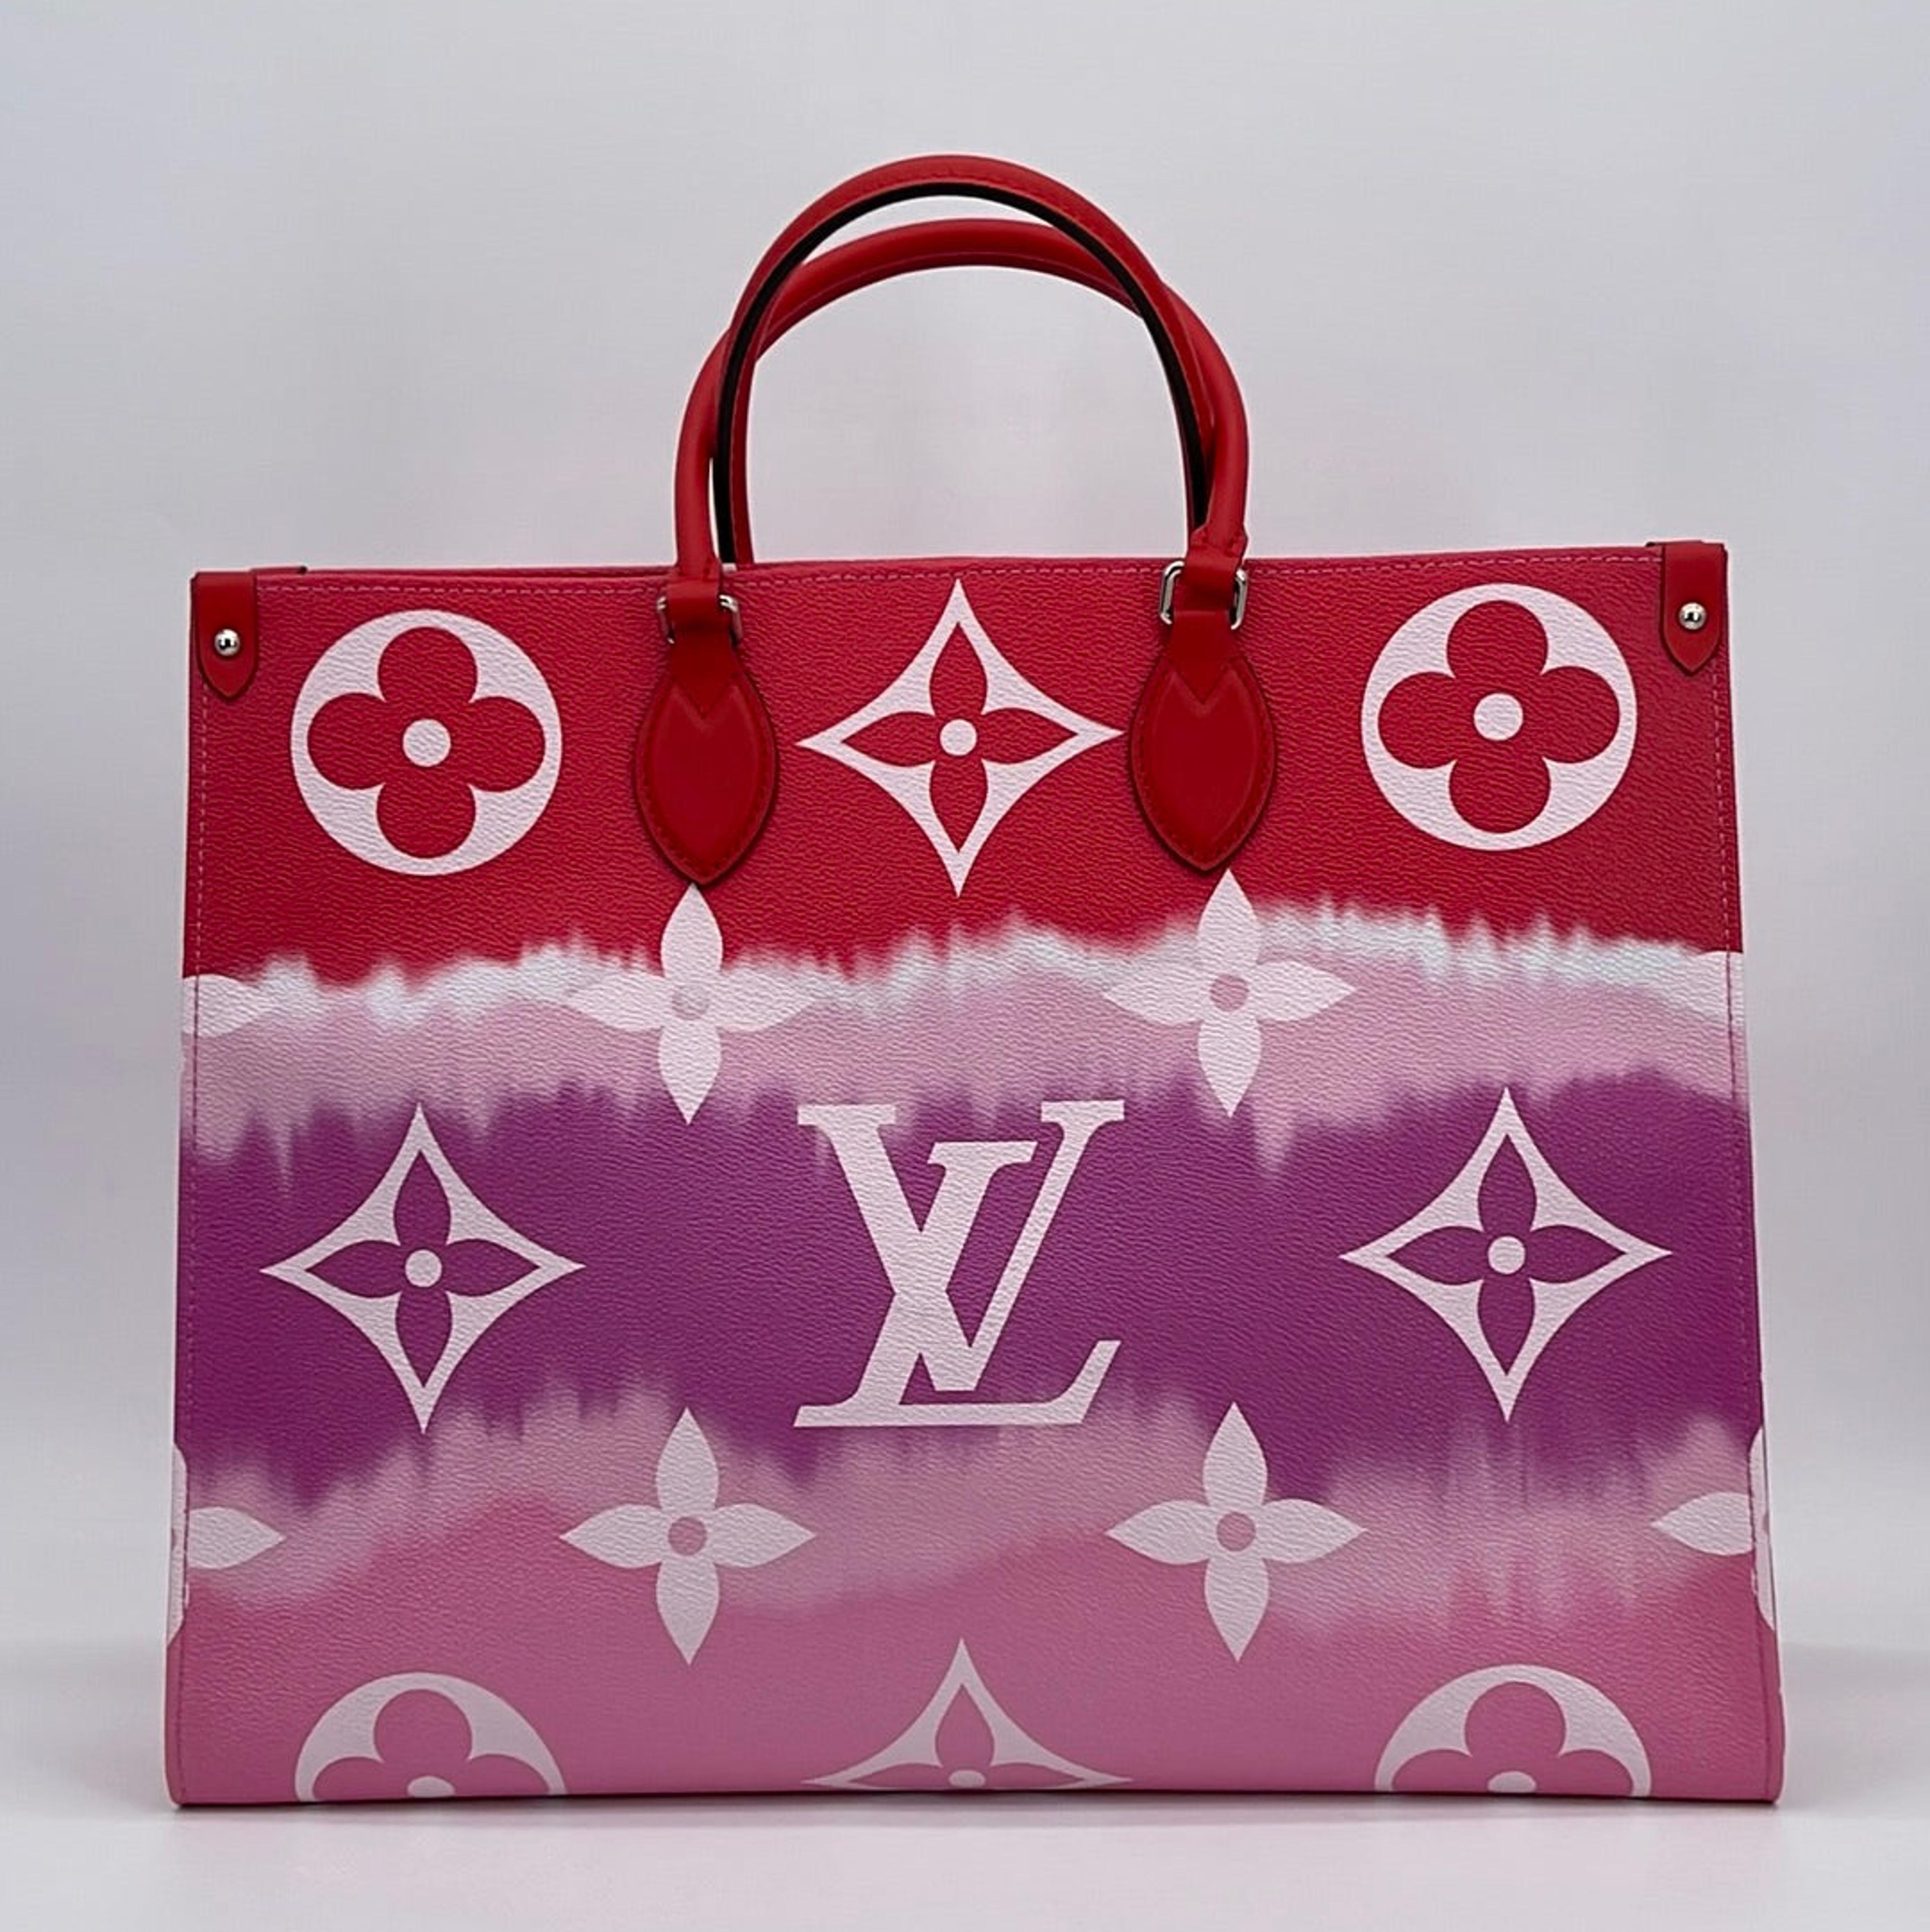 LOUIS VUITTON MONOGRAM NEVERFULL LIMITED EDITION ESCALE TOTE BAG